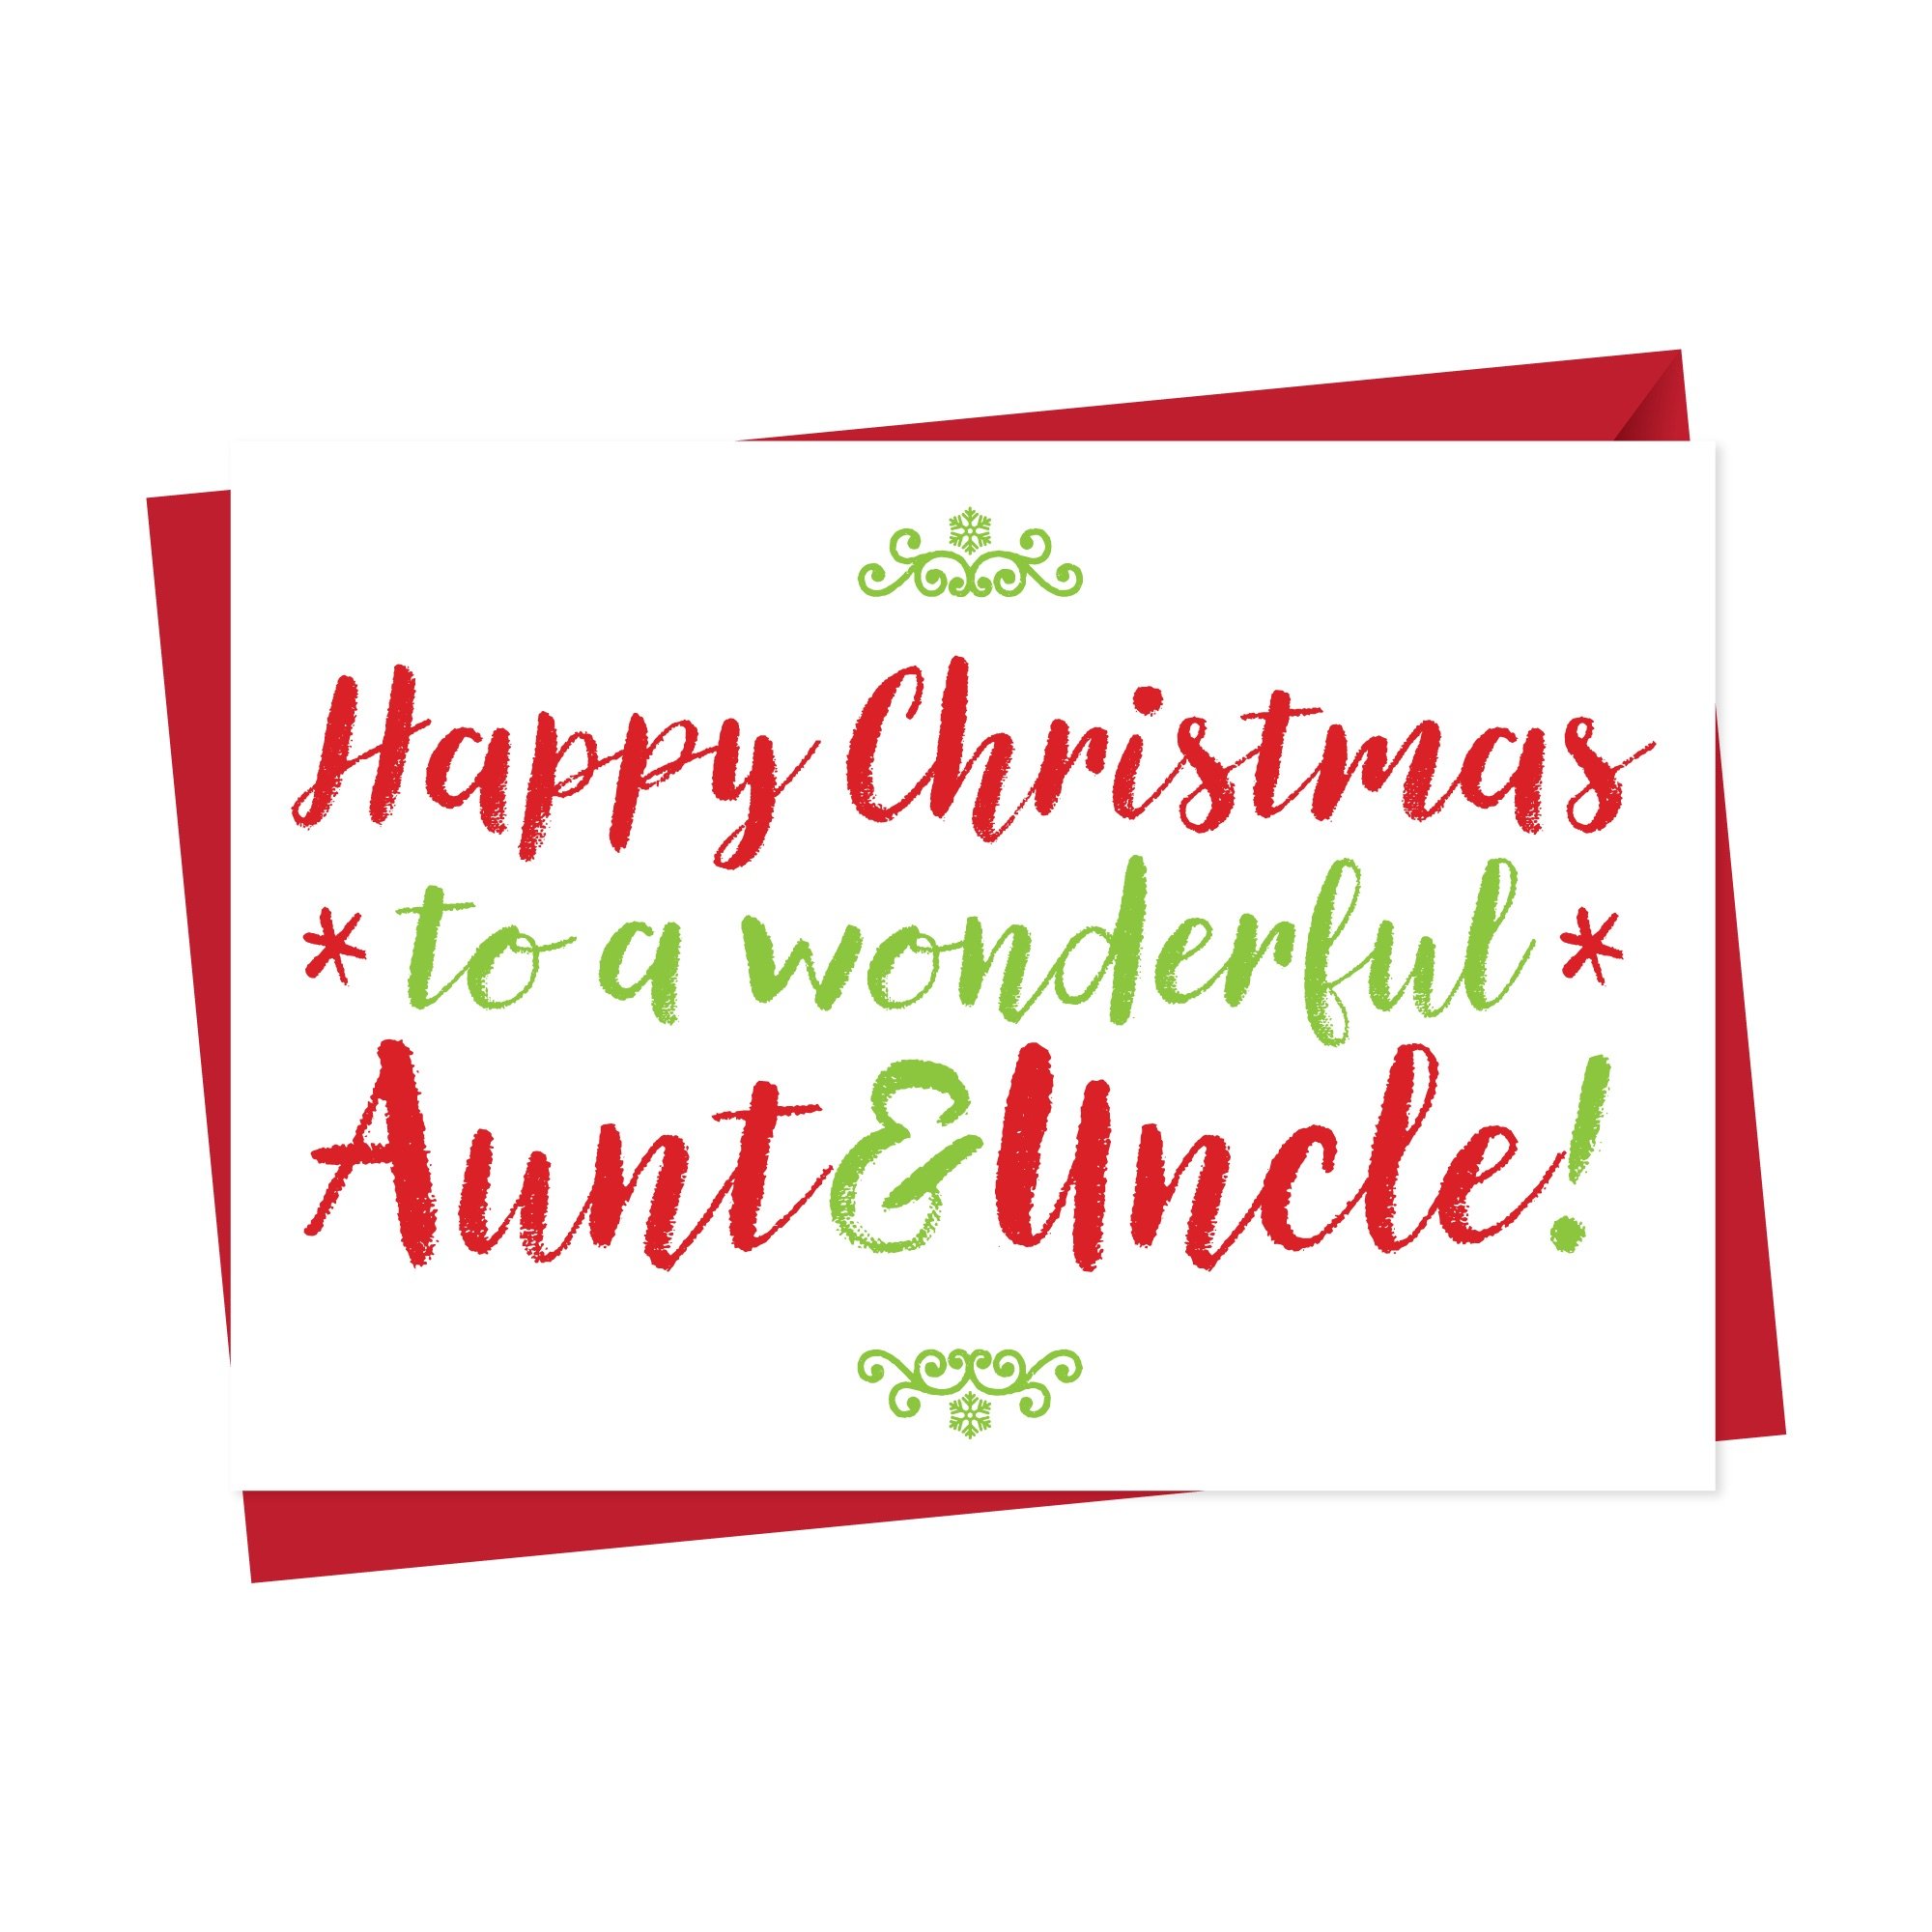 Christmas Card For Wonderful Aunt And Uncle